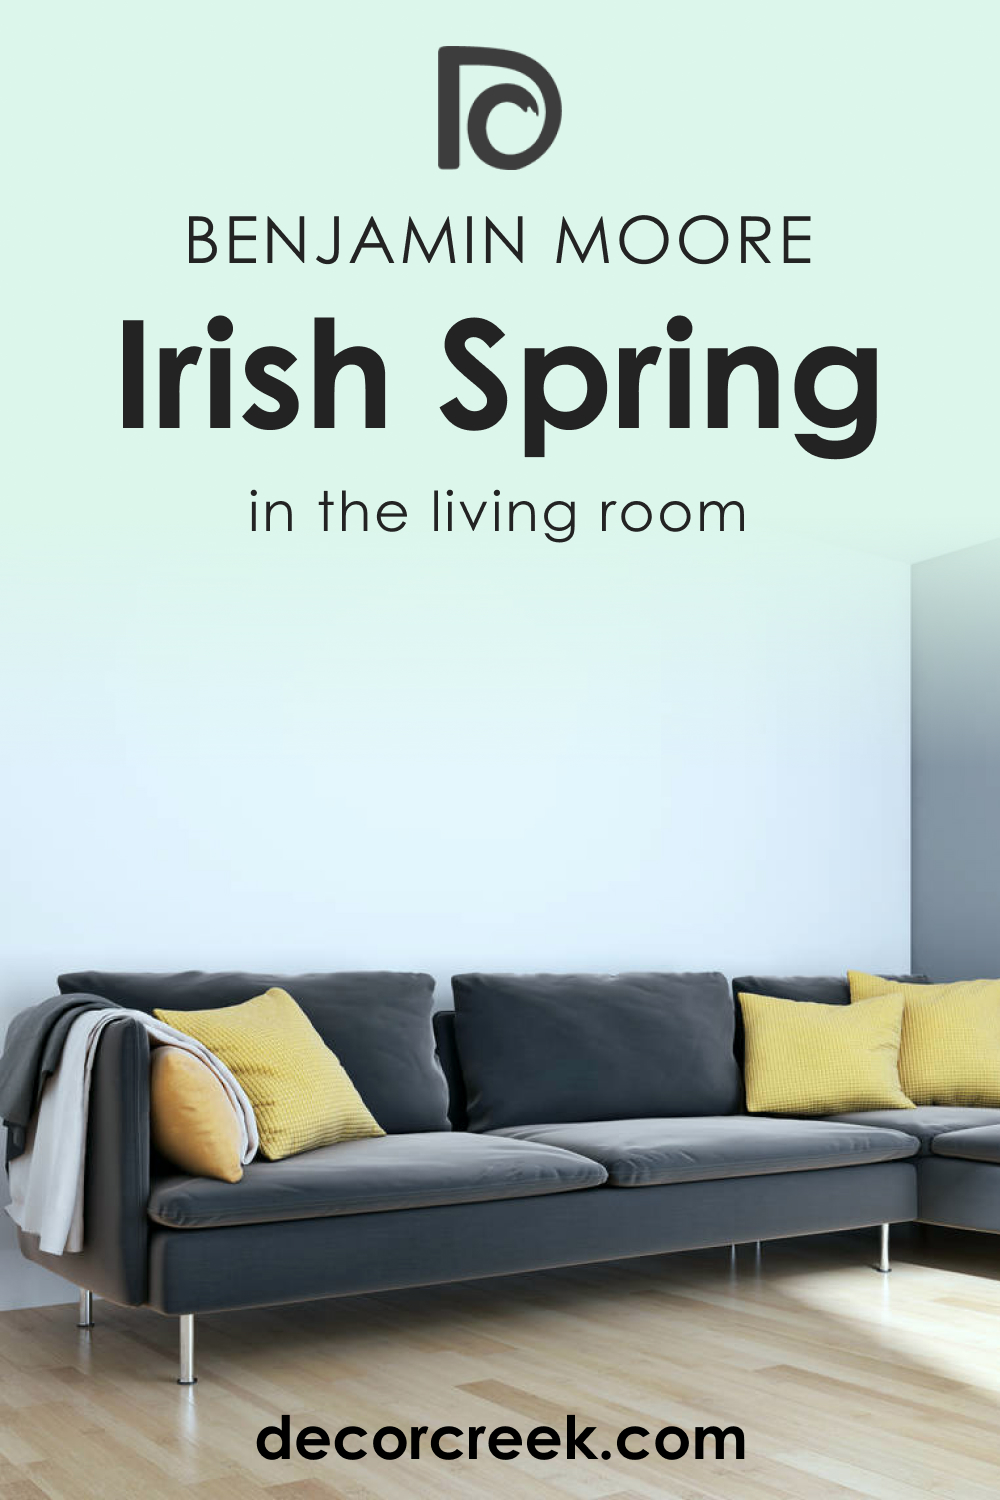 How to Use Irish Spring 2038-70 in the Living Room